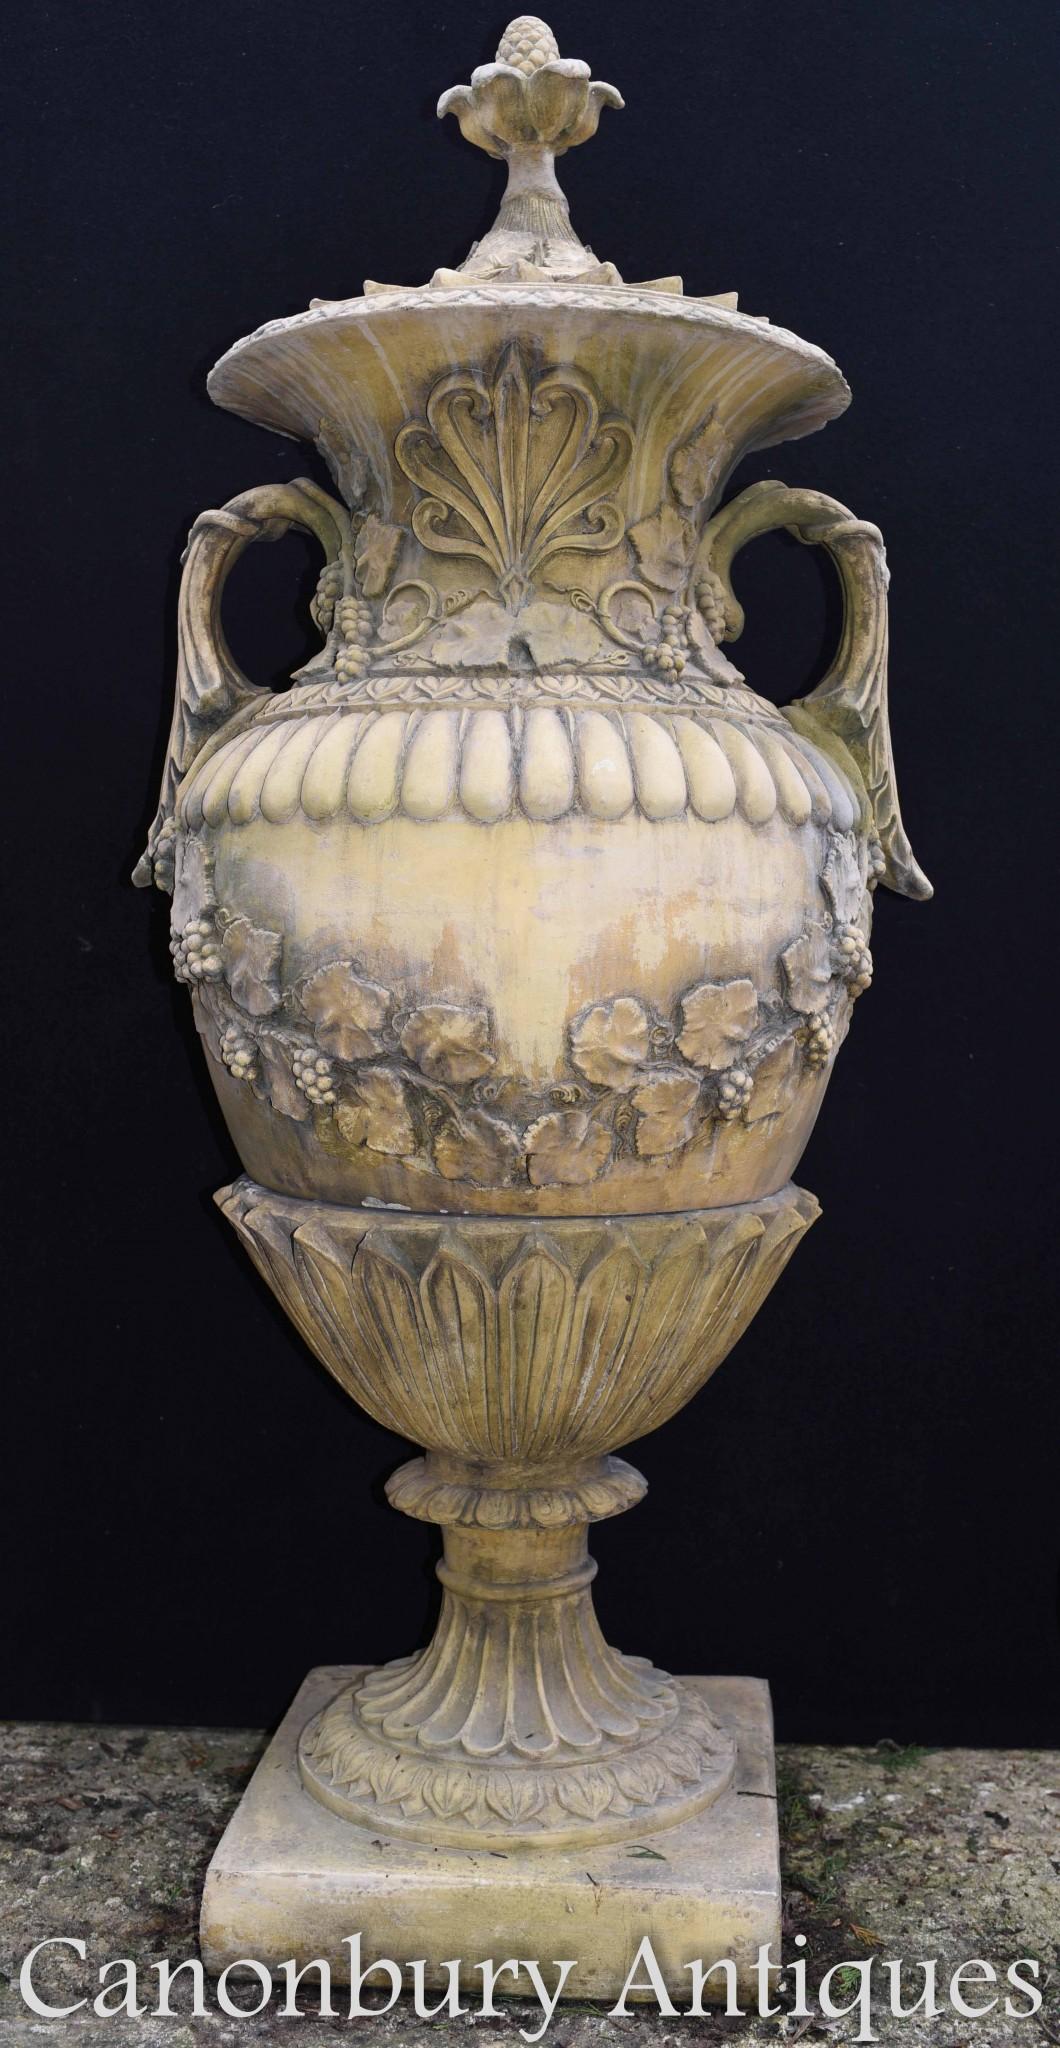 Exquisite pair of large English garden urns of amphora form
 Great pair for the classically inspired English landscaped garden
 Proffusely decorated with floral motifs and a leaf sash
 Lids come off and the urns come in two parts

Canonbury